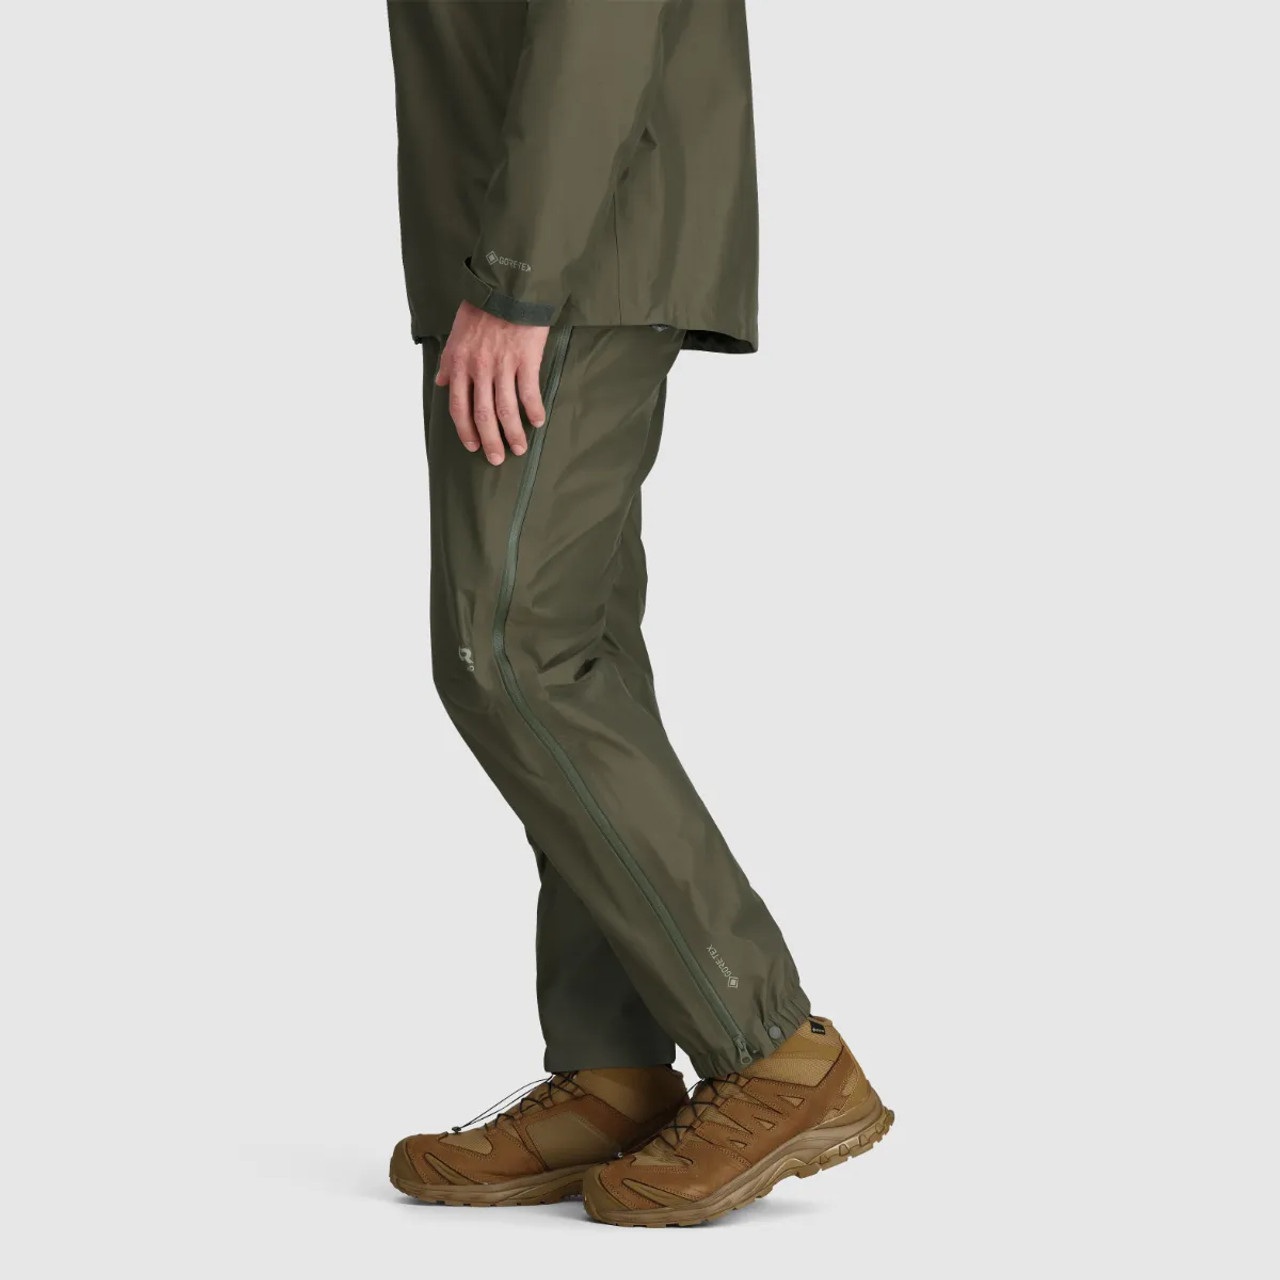 Outdoor Research Men's Foray Pants, Coyote / XL